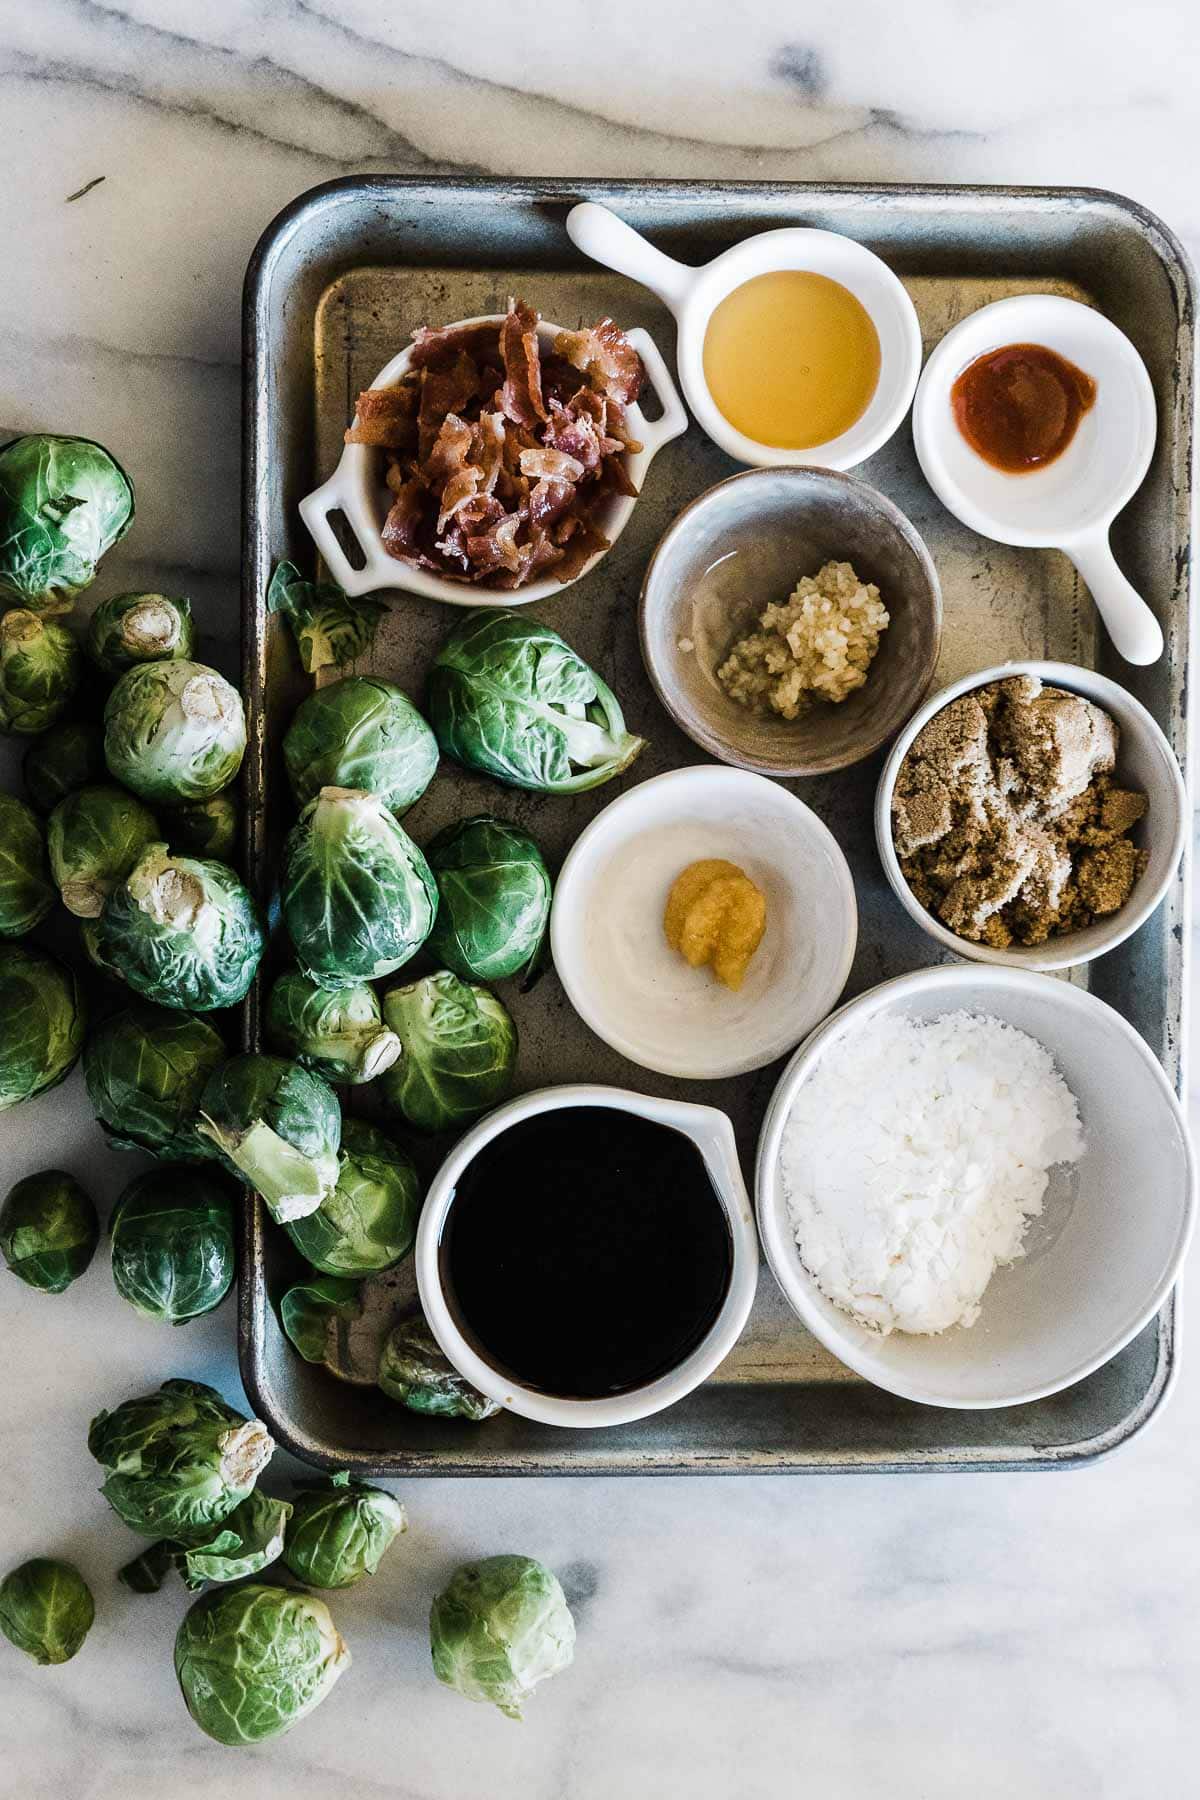 Ingredients needed to make roasted Brussels sprouts.